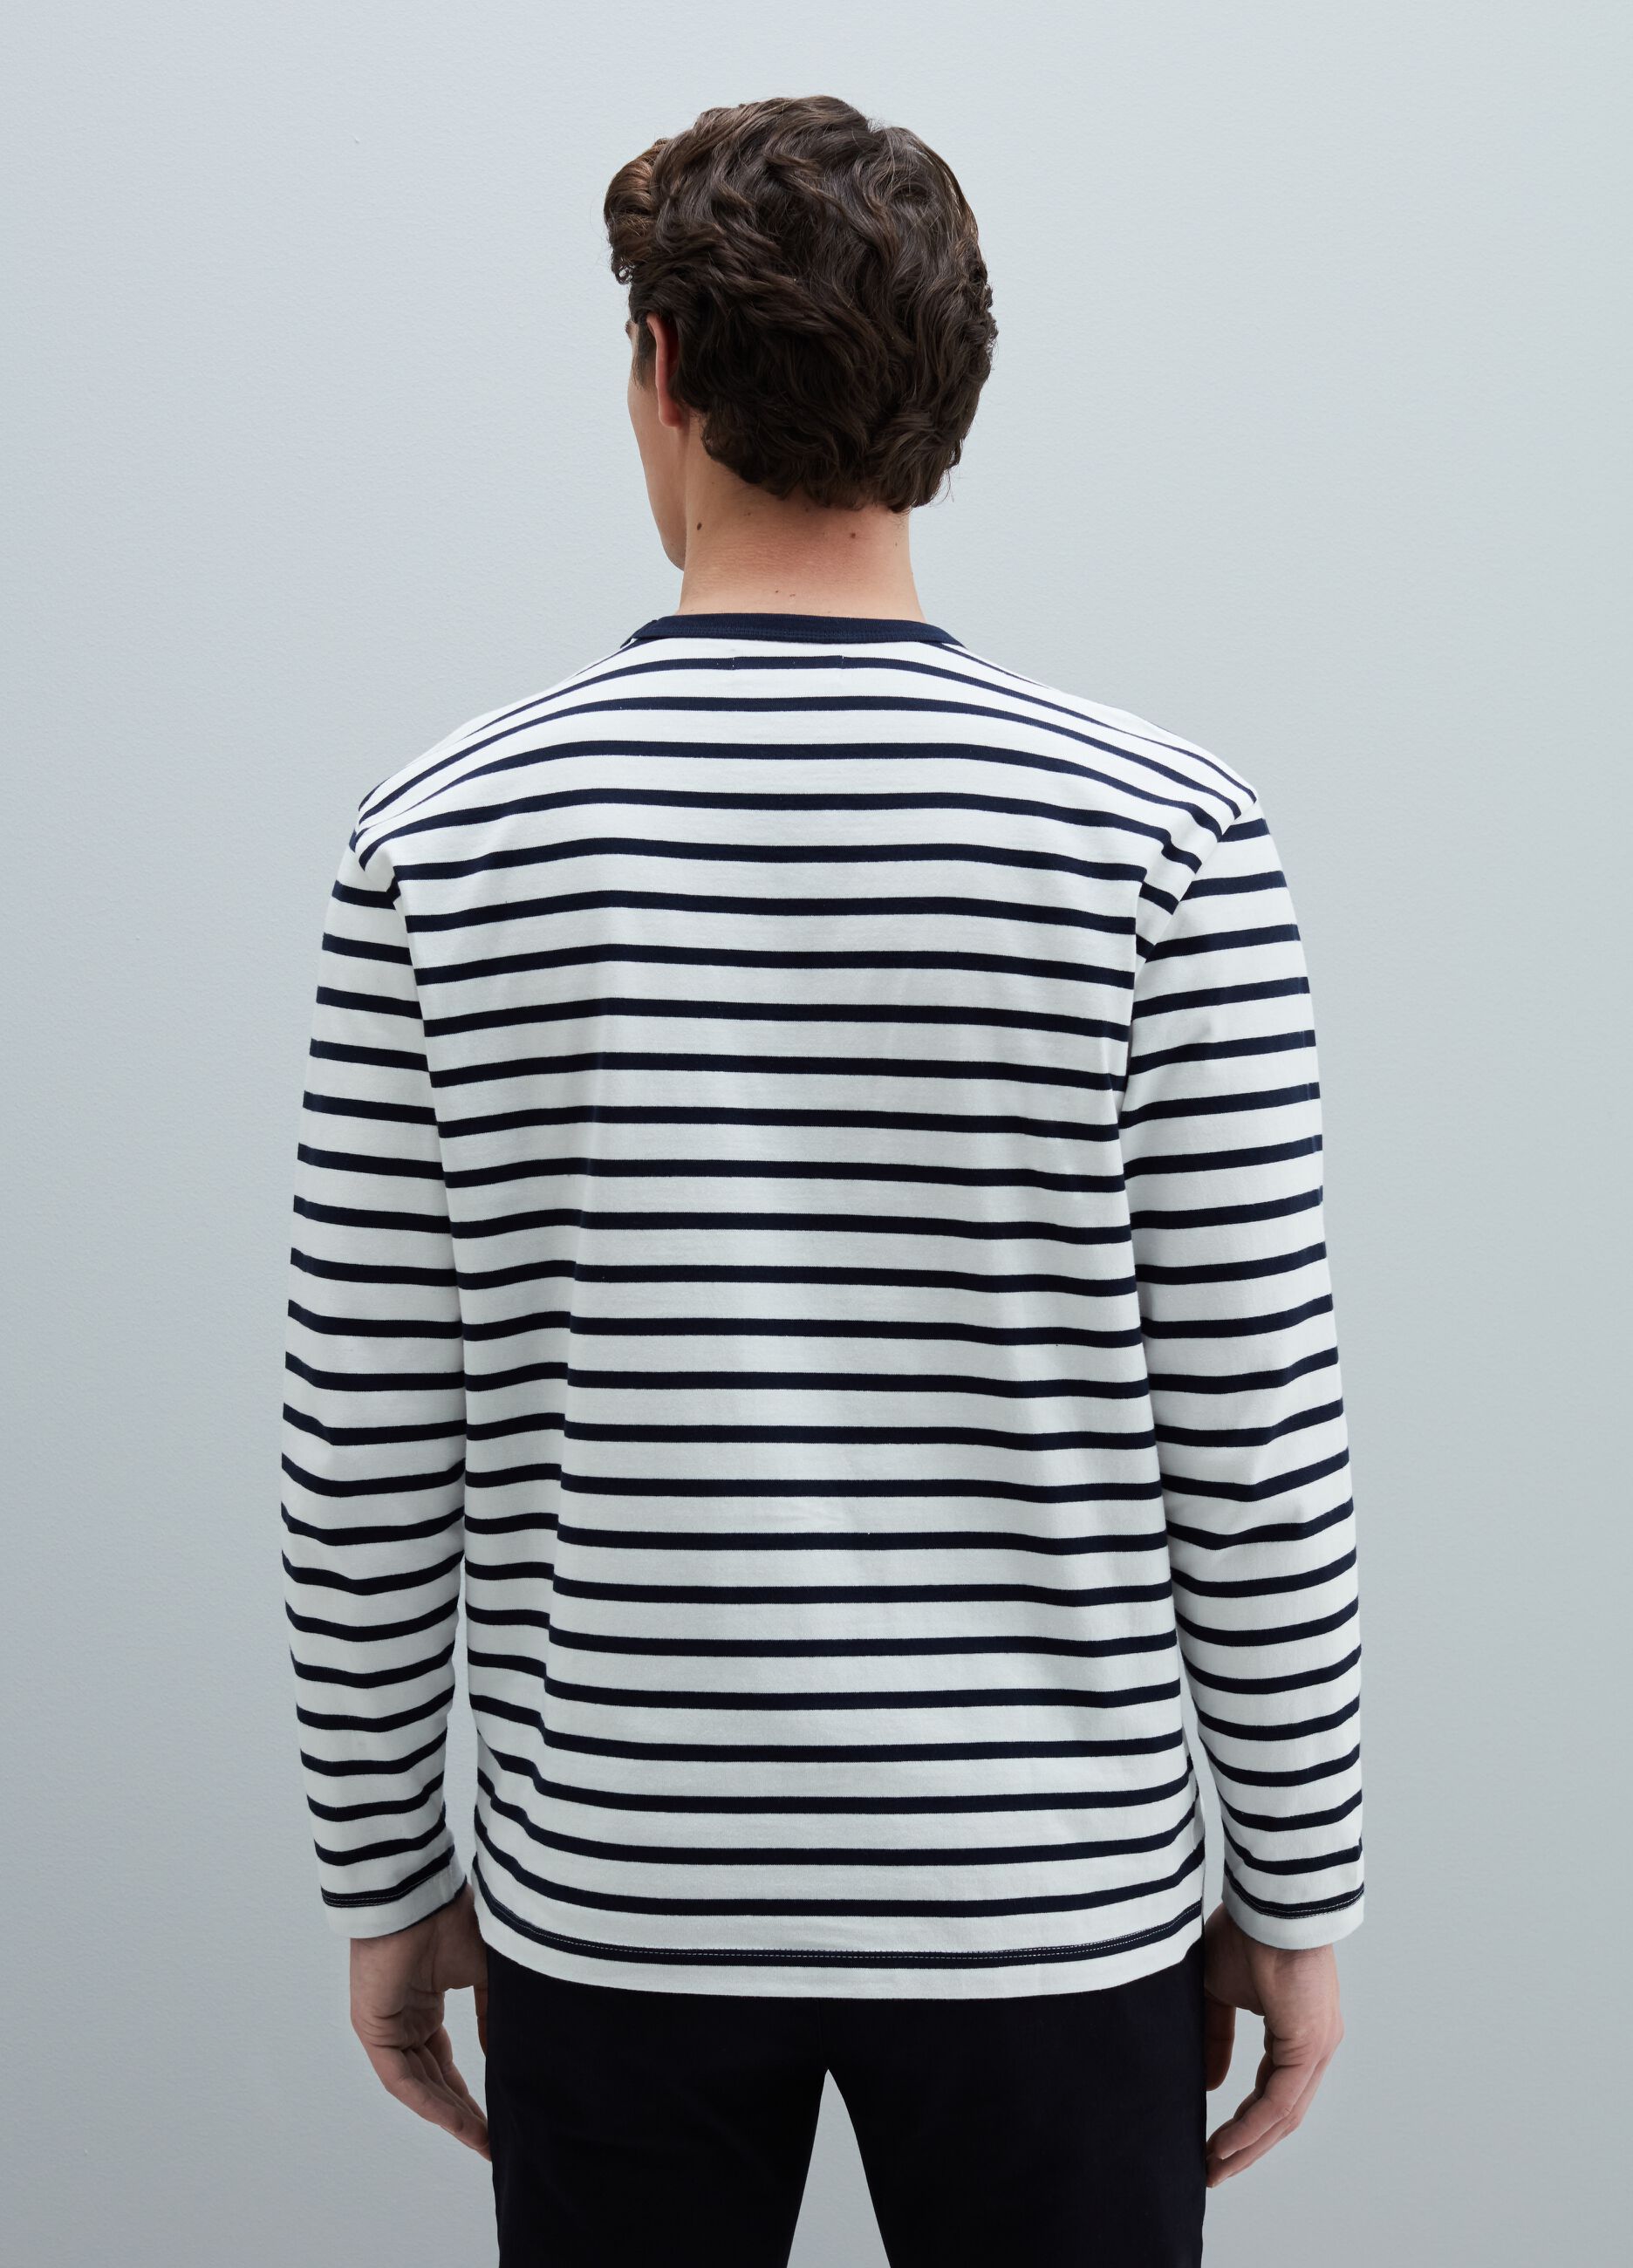 T-shirt with stripes.